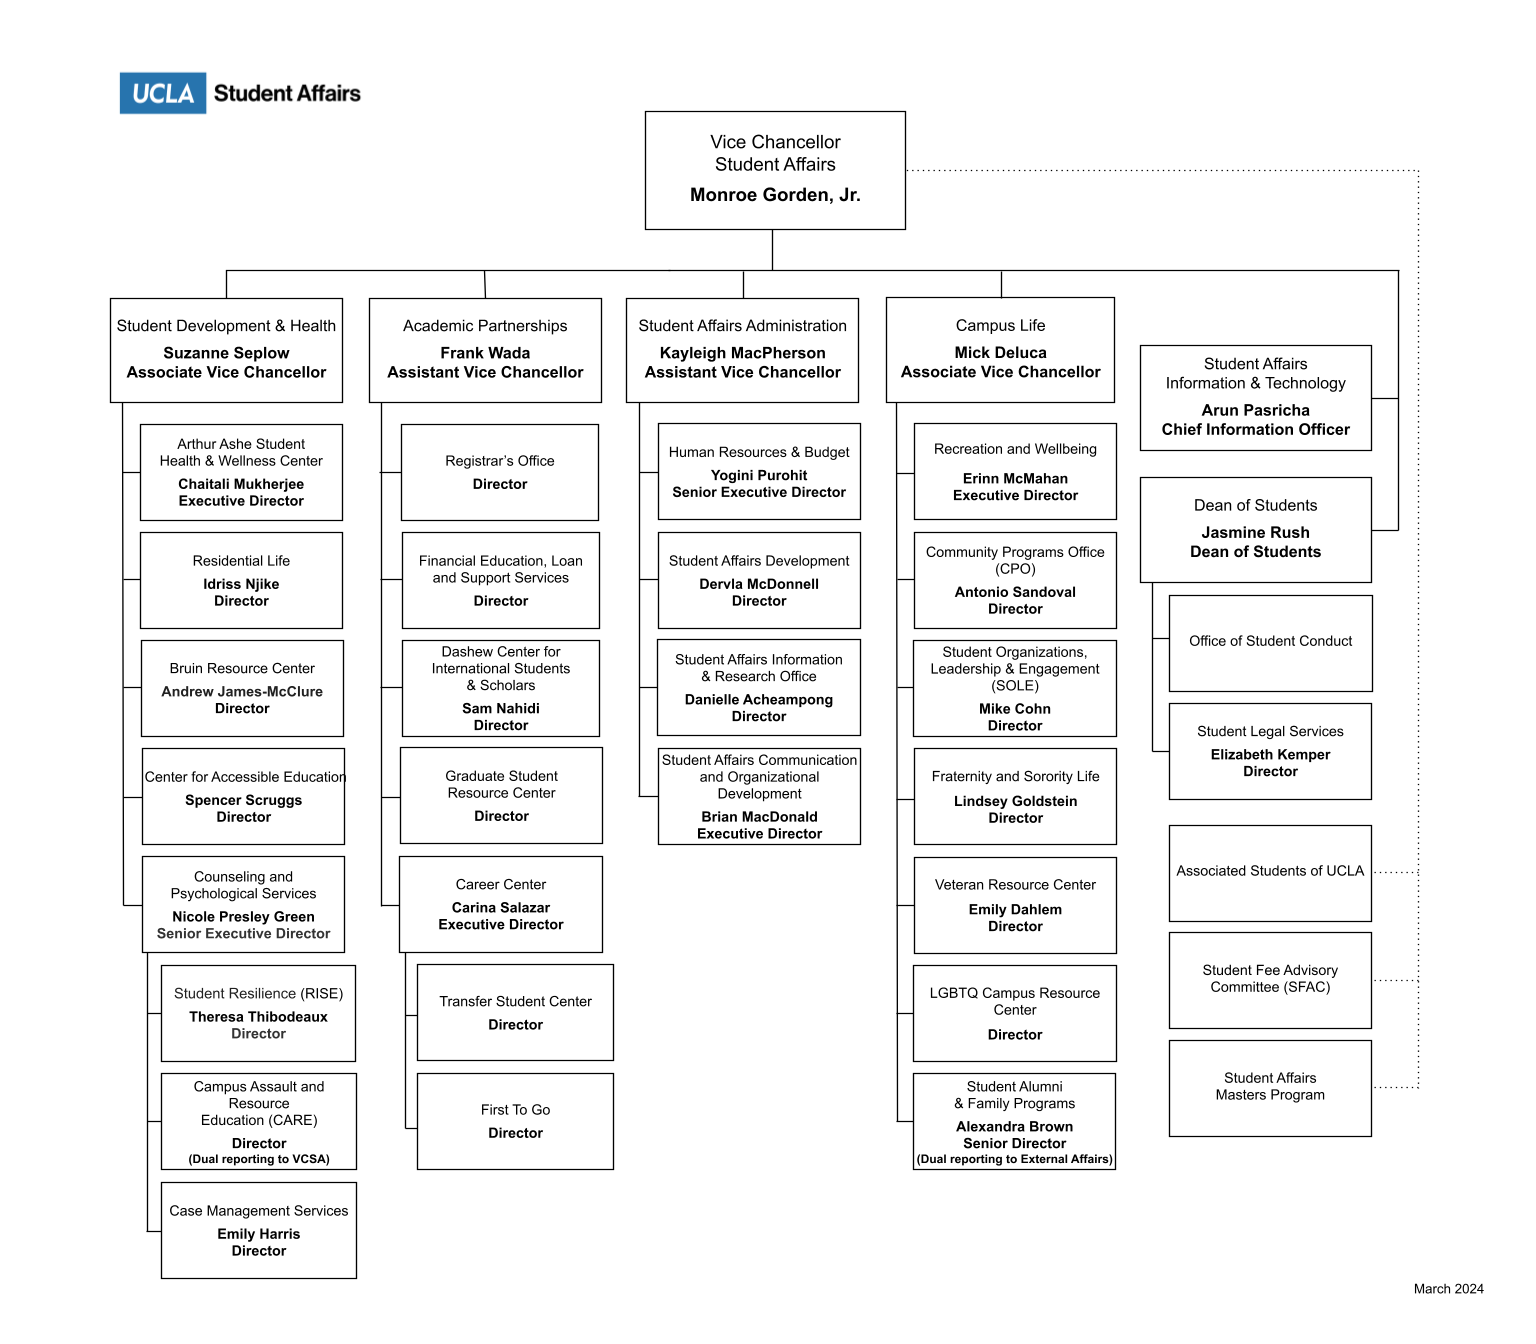 Student Affairs Organization Chart- updated March 2024